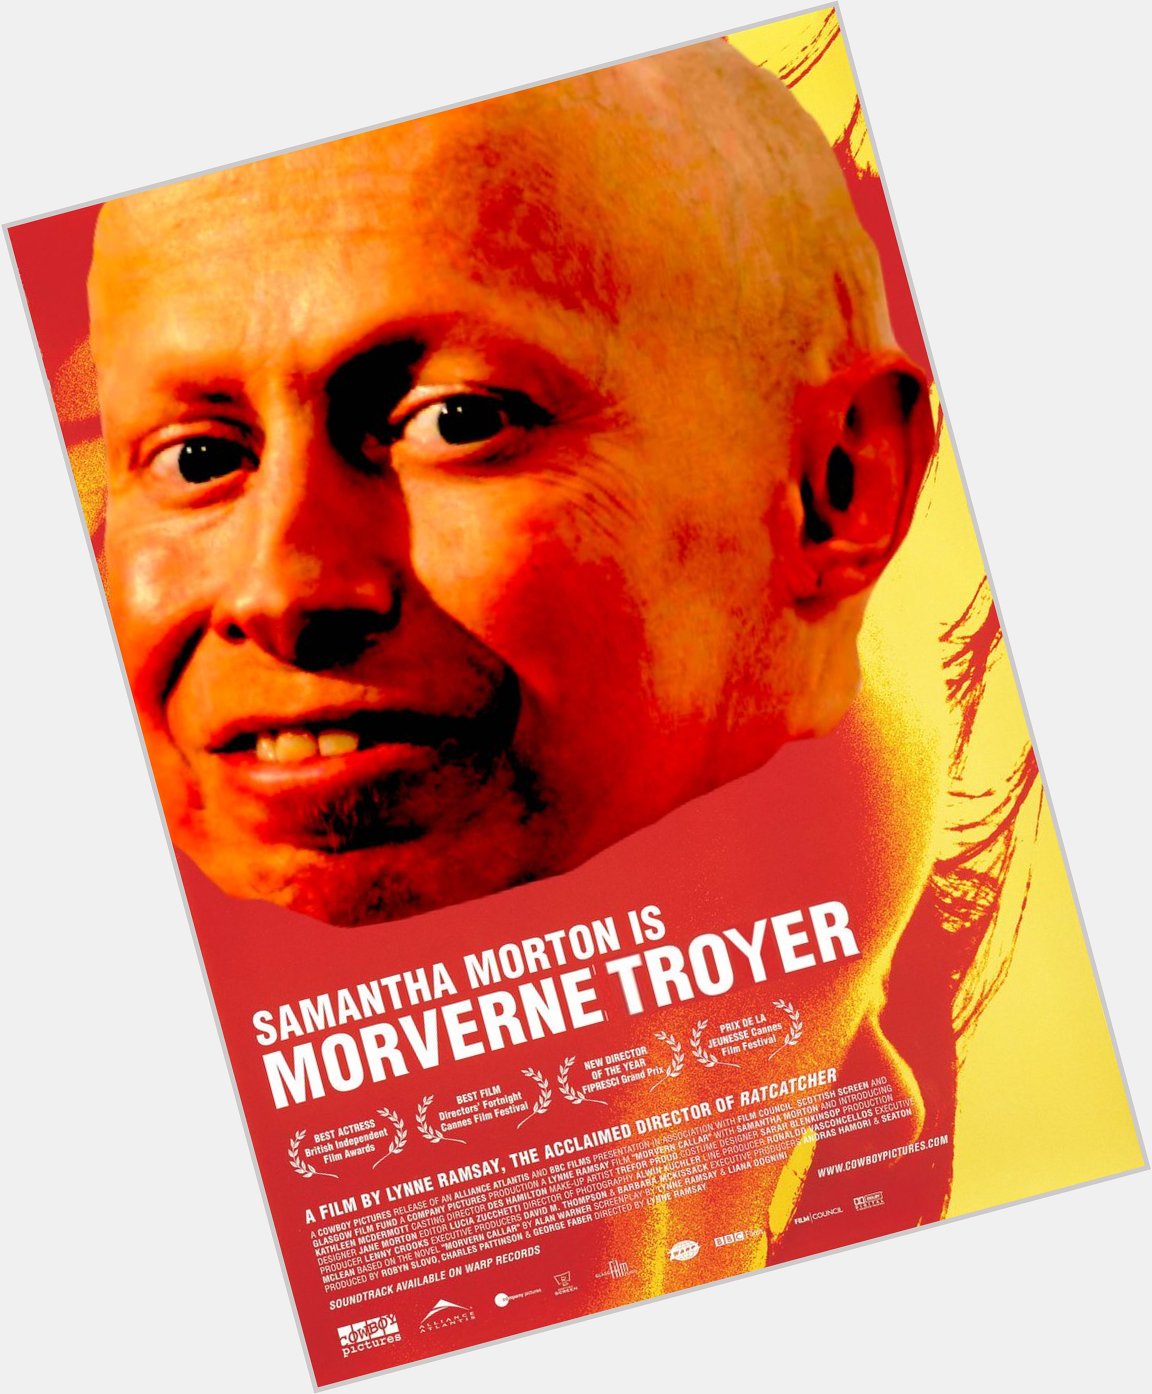 Happy birthday to the late verne troyer, loved your work 